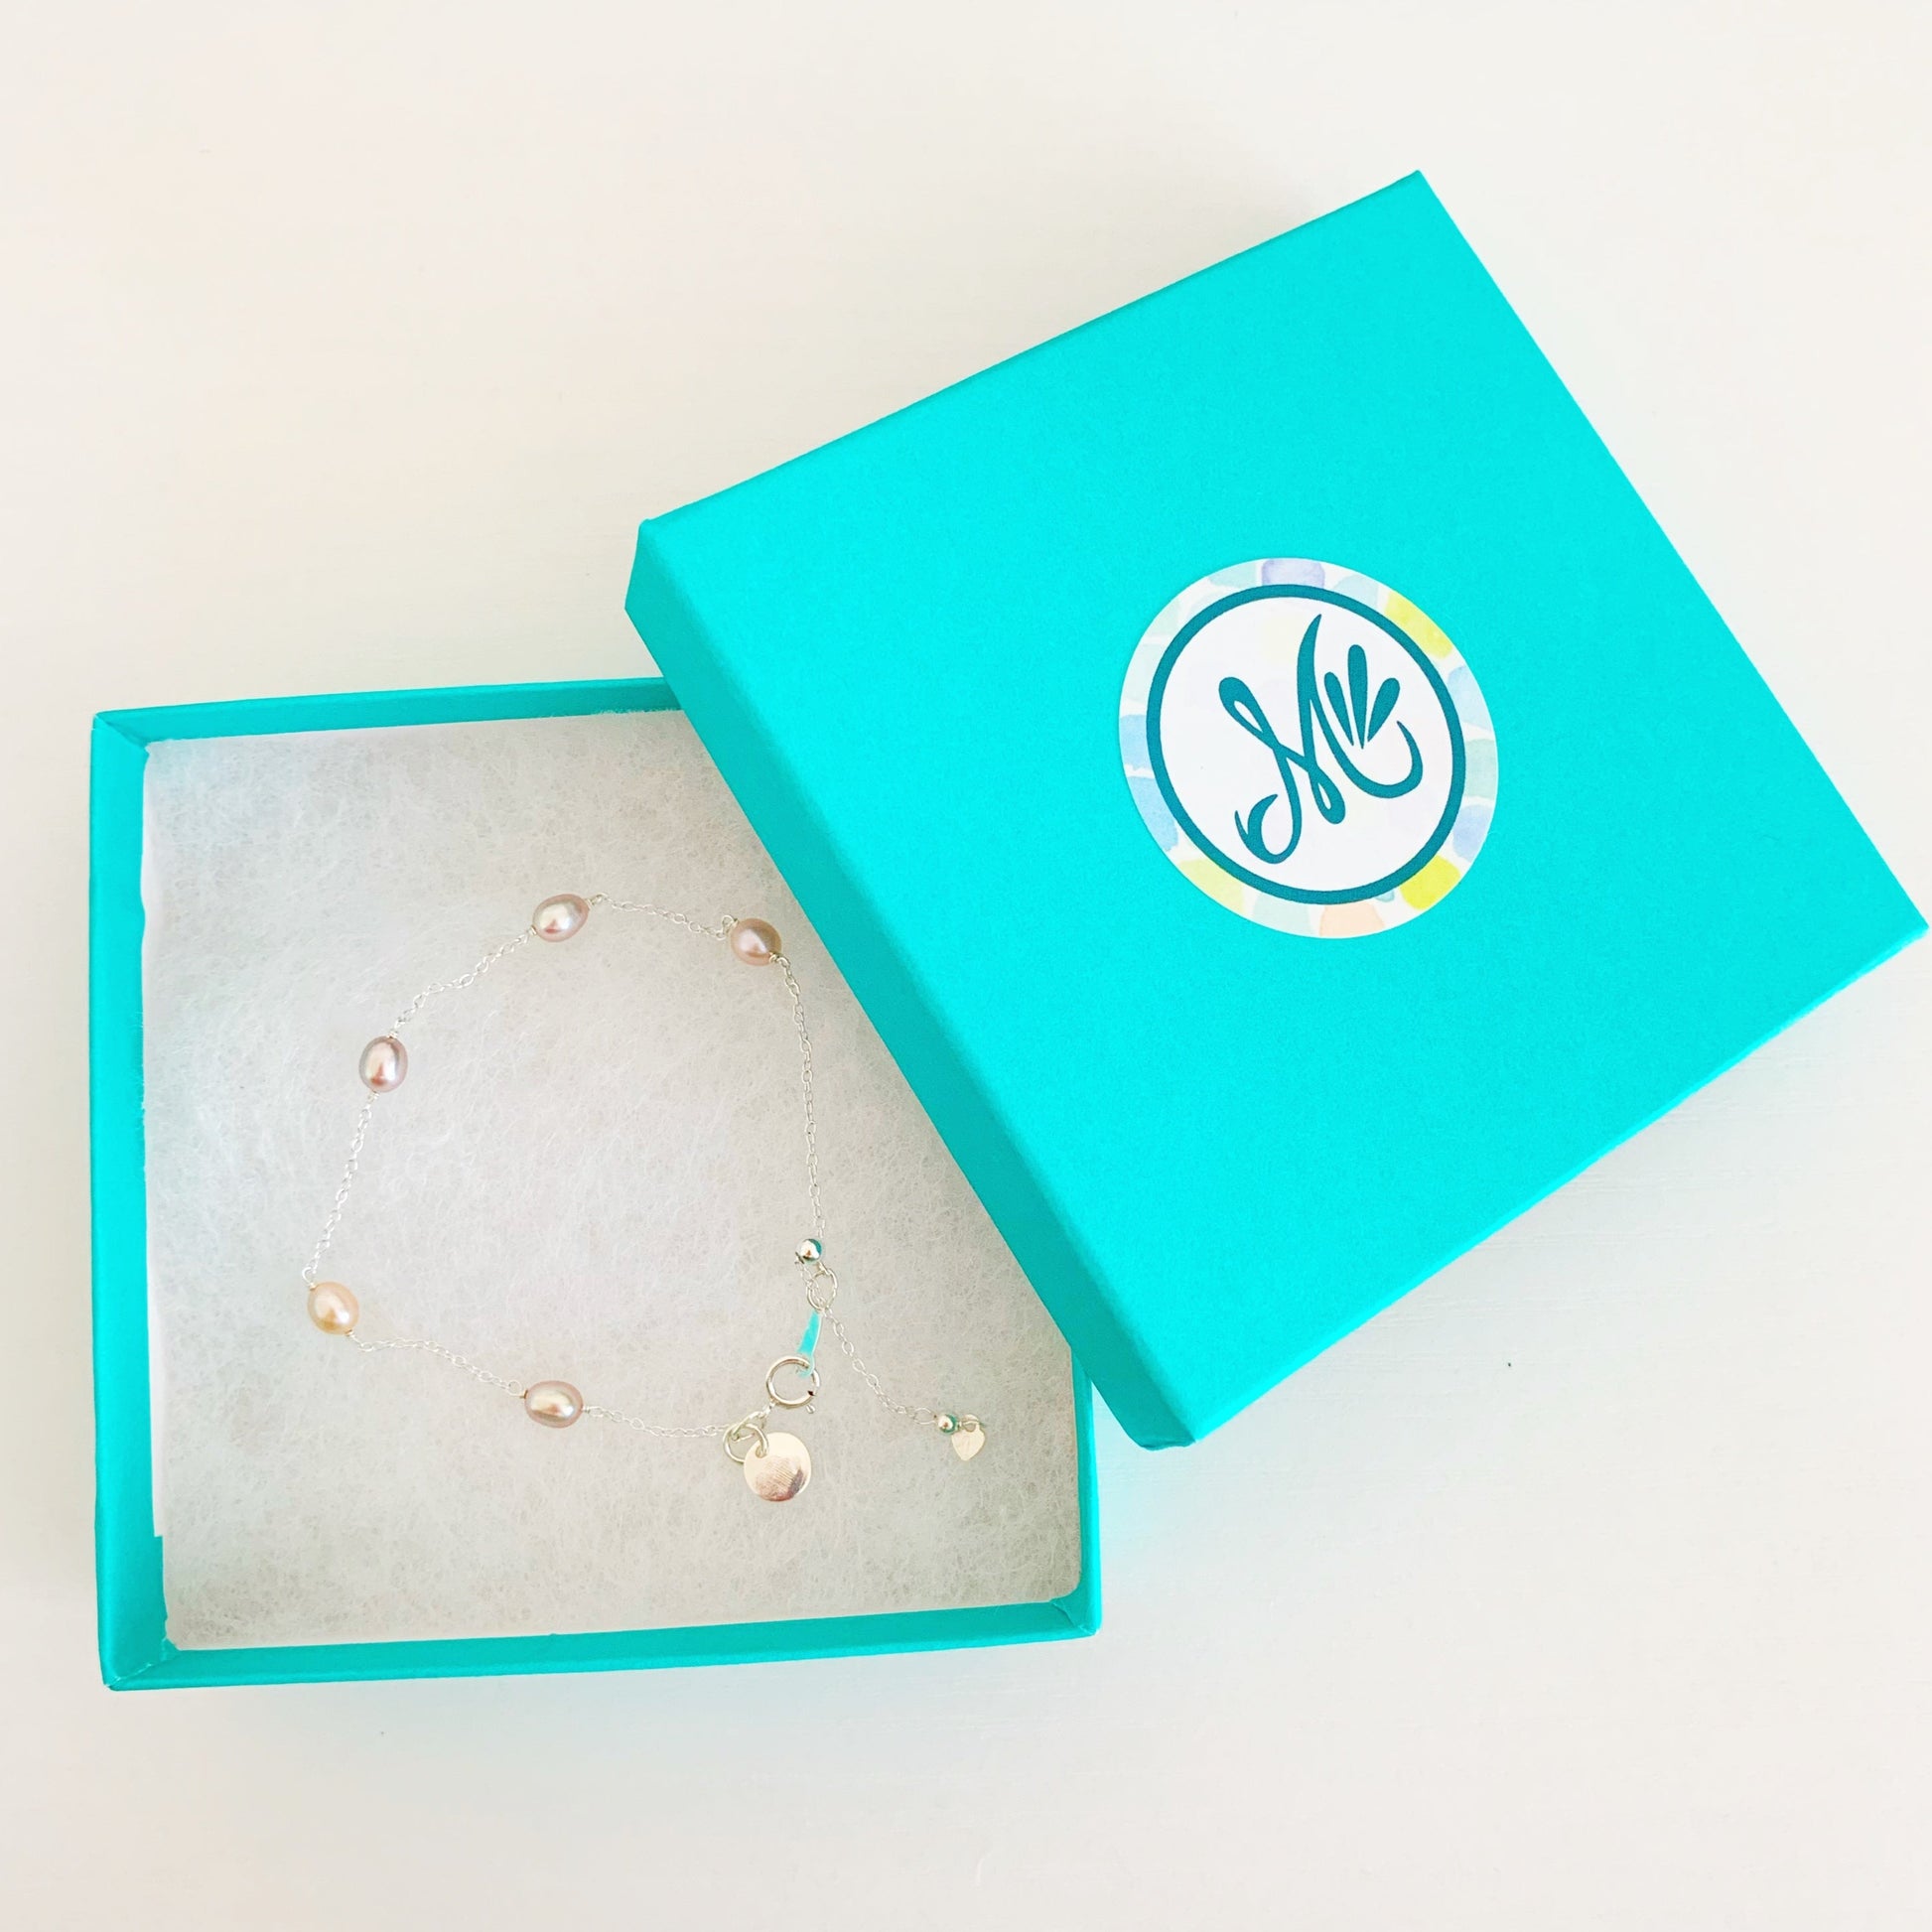 block island adjustable bracelet by mermaids and madeleines features natural pink color small oval pearls in stations on a sterling silver chain bracelet. theres a slide bead to adjust the length near the clasp. this bracelet is photographed in a cotton lined teal gift box on a white surface